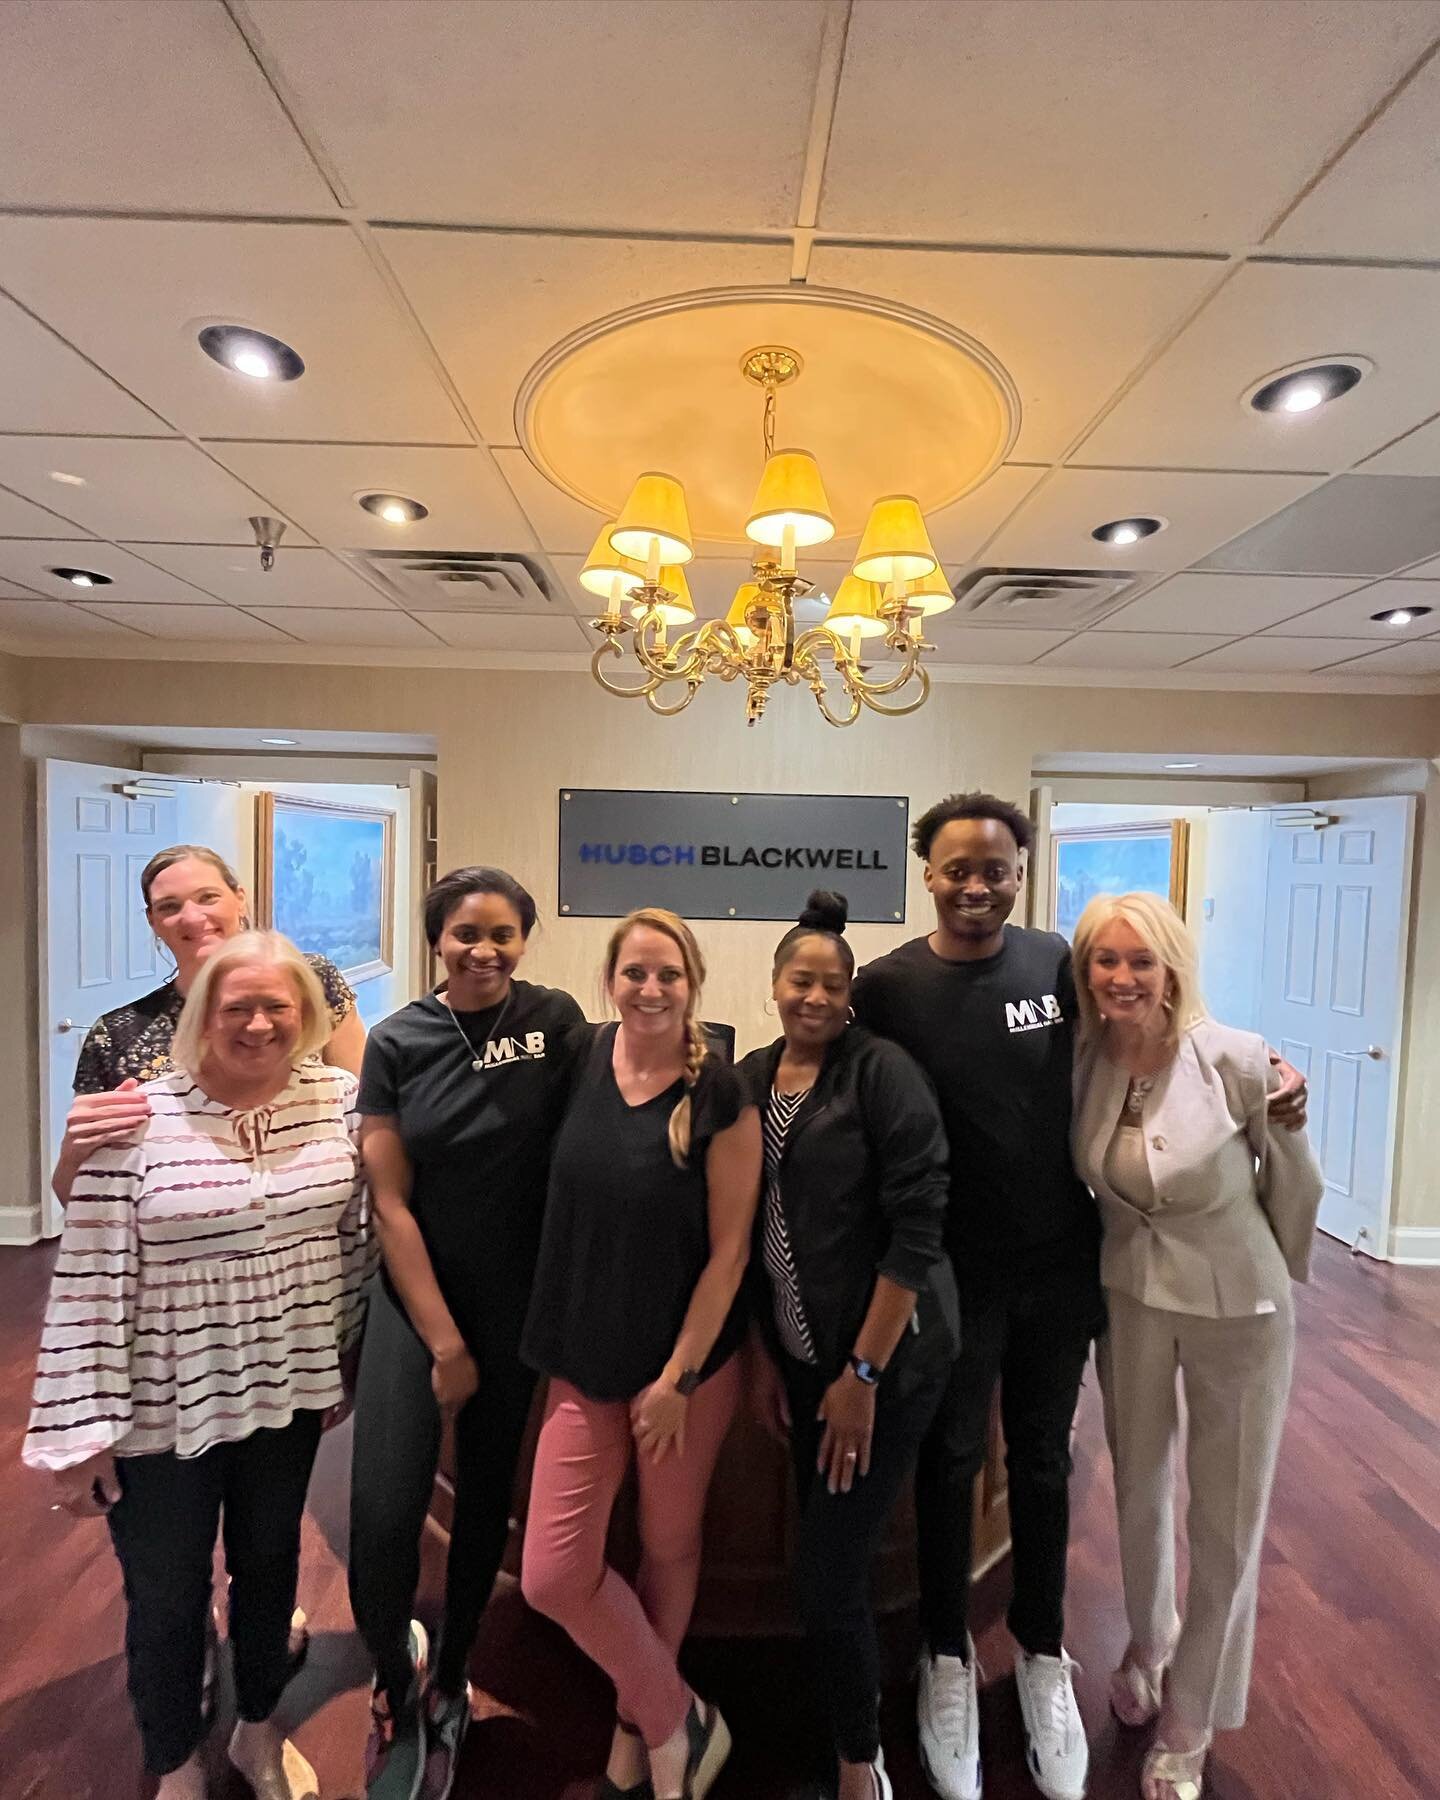 We had the pleasure of providing on-demand services to @huschblackwell  for their awesome team of staff! 🥳Thanks to the @go.mnb independent nail technician @malachithenailguy for providing awesome nail care and customer service. 🤗
&bull;
&bull;
If 